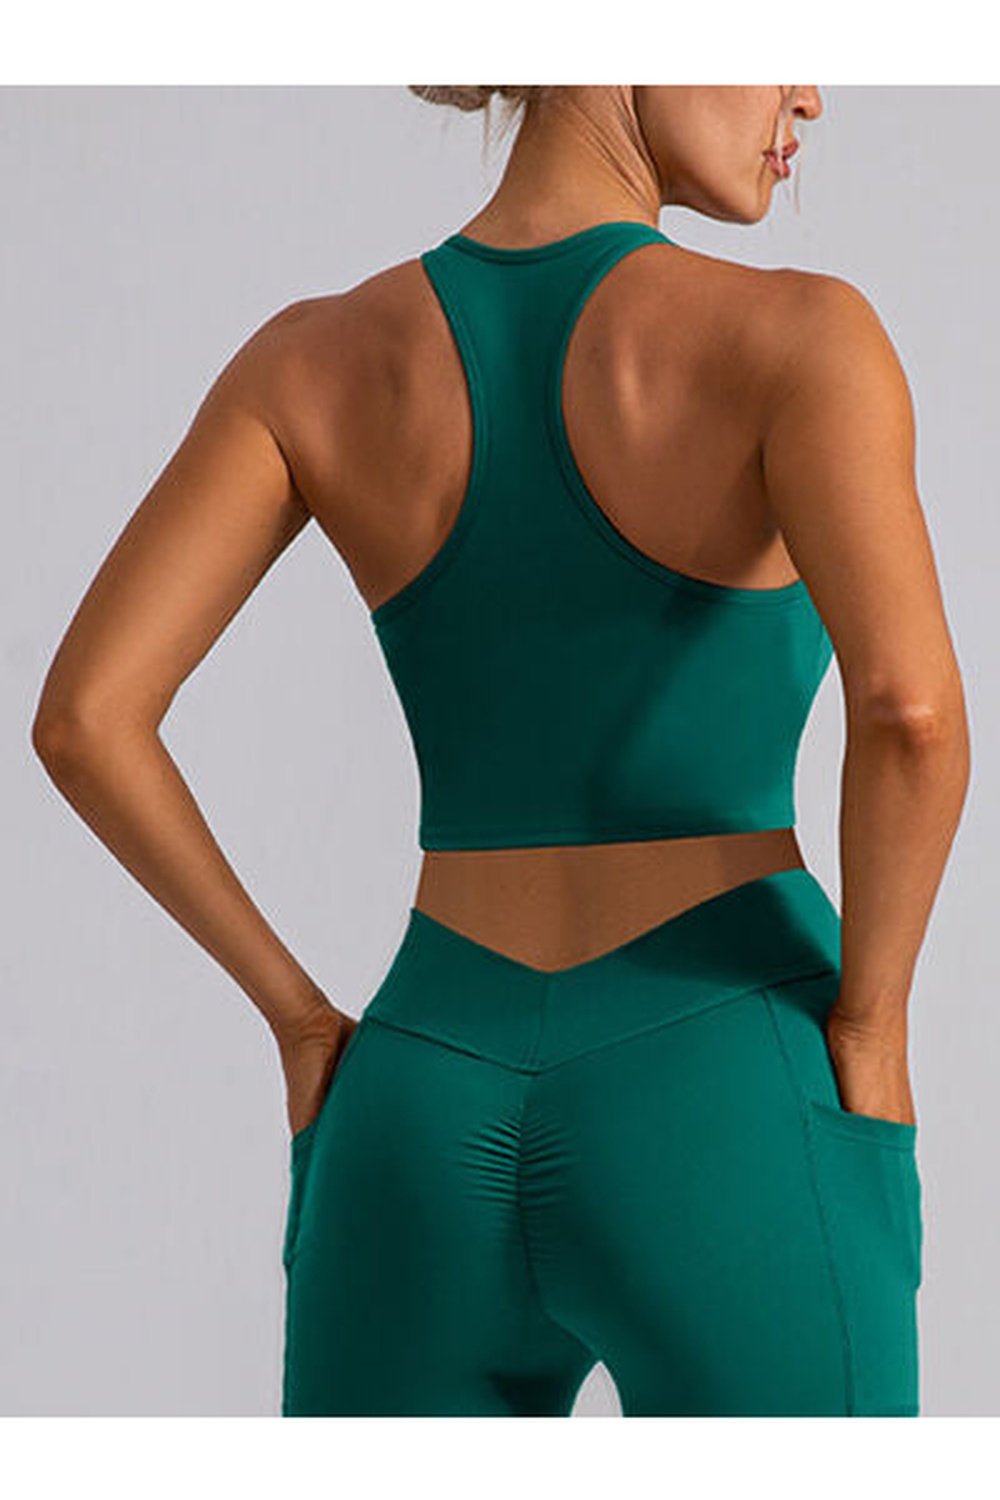 Square Neck Racerback Cropped Tank - Crop Tops & Tank Tops - FITGGINS